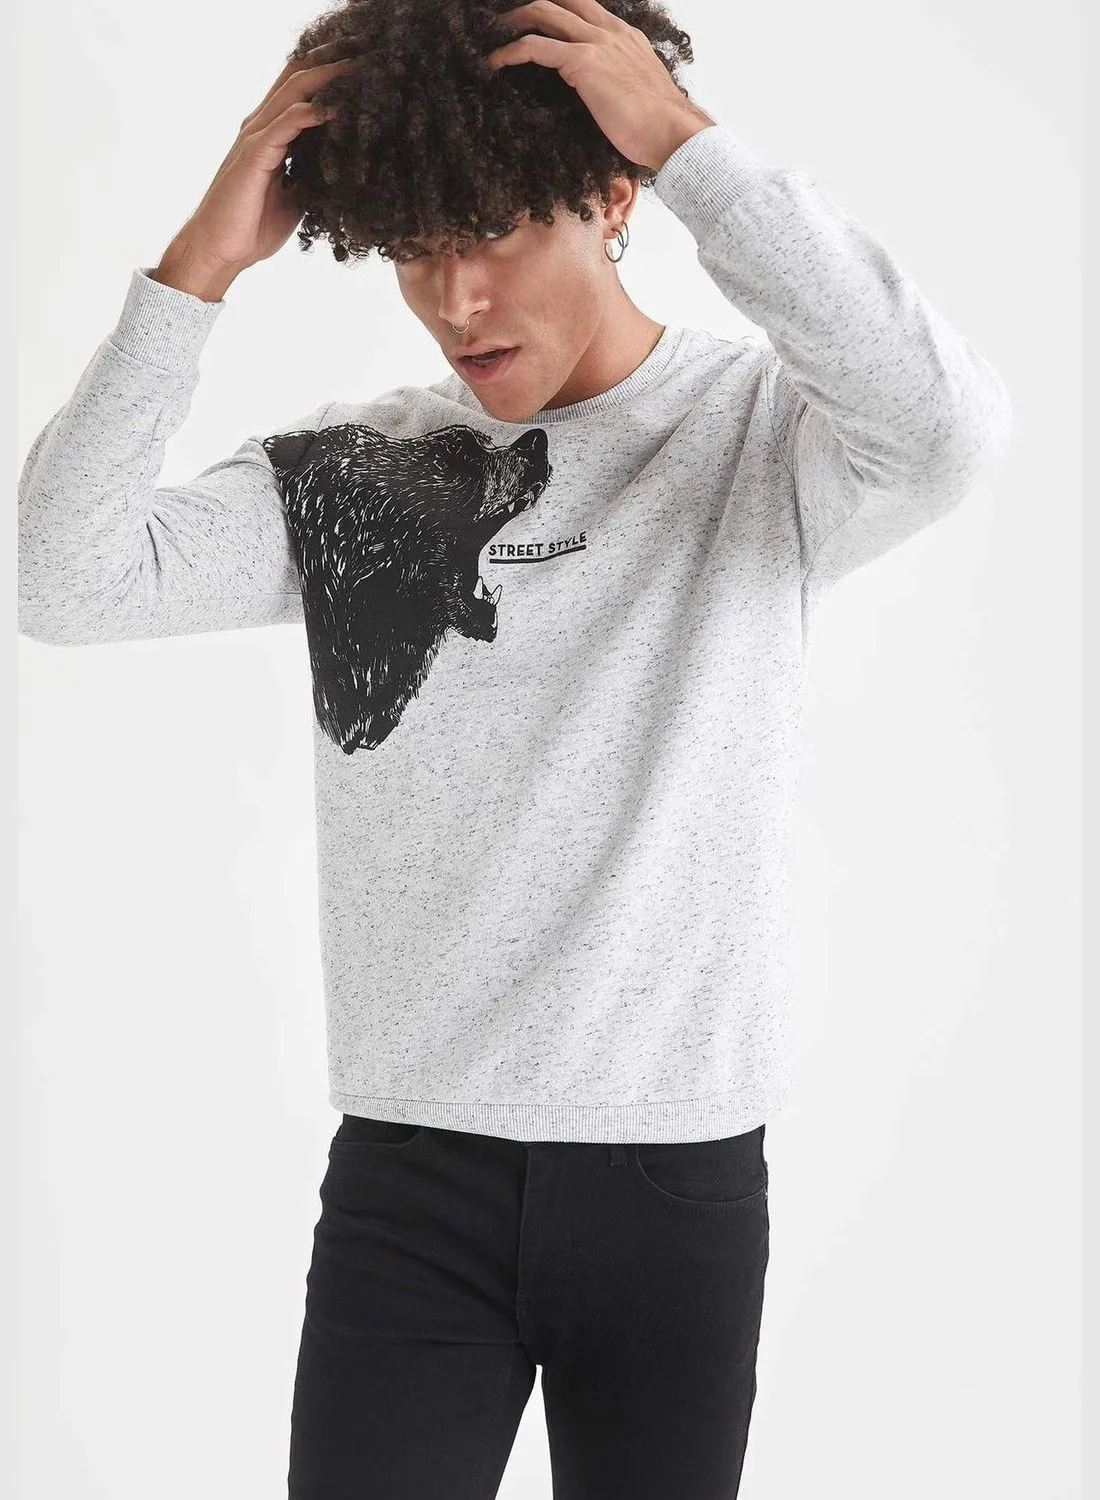 DeFacto Man Knitted Slim Fit Crew Neck Sweat Shirt